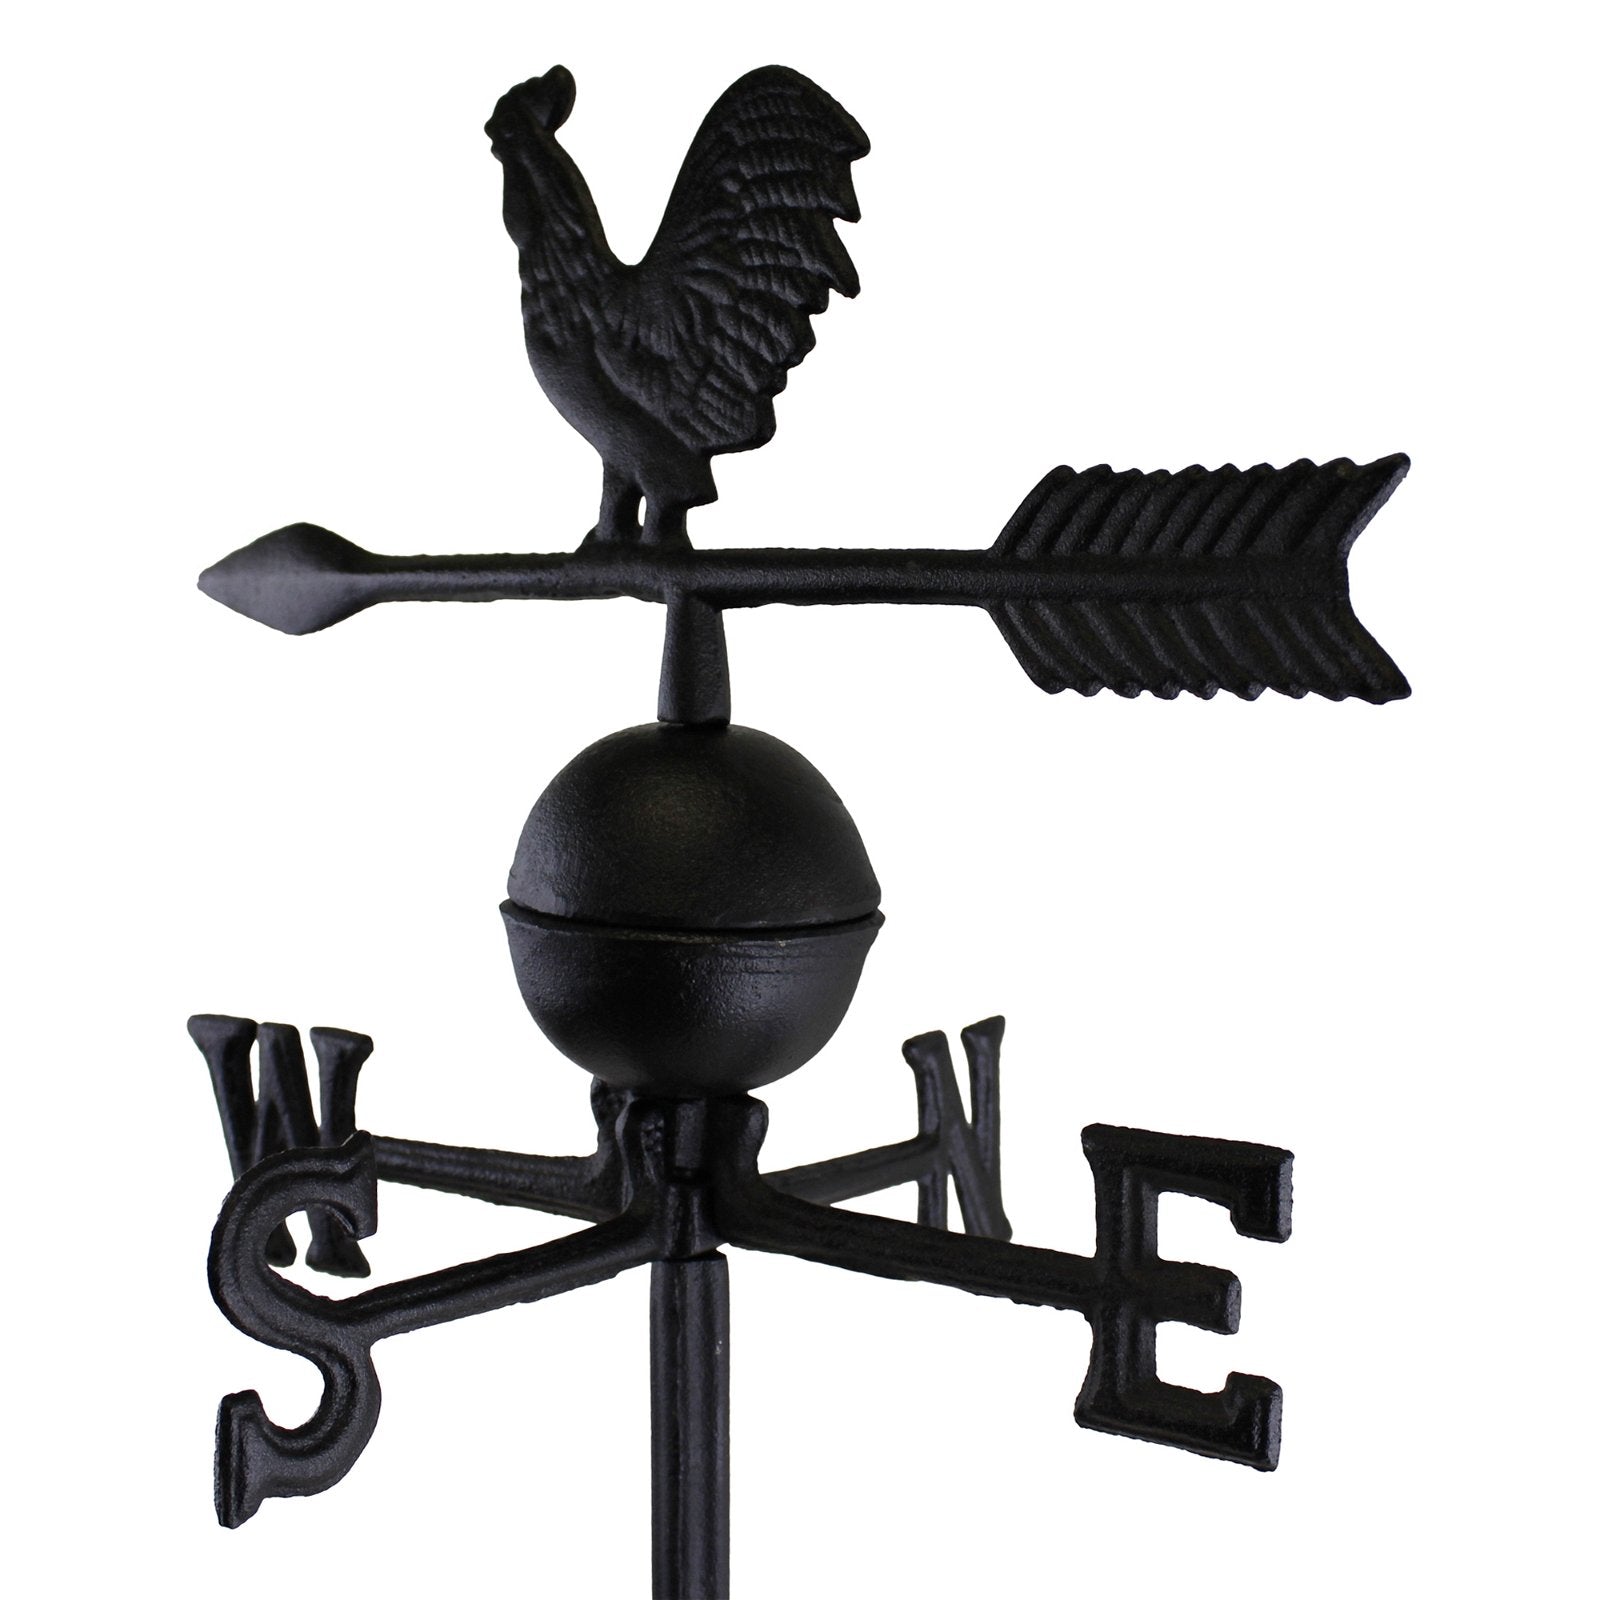 Cast Iron Freestanding Large Weather Vane, Rooster Design